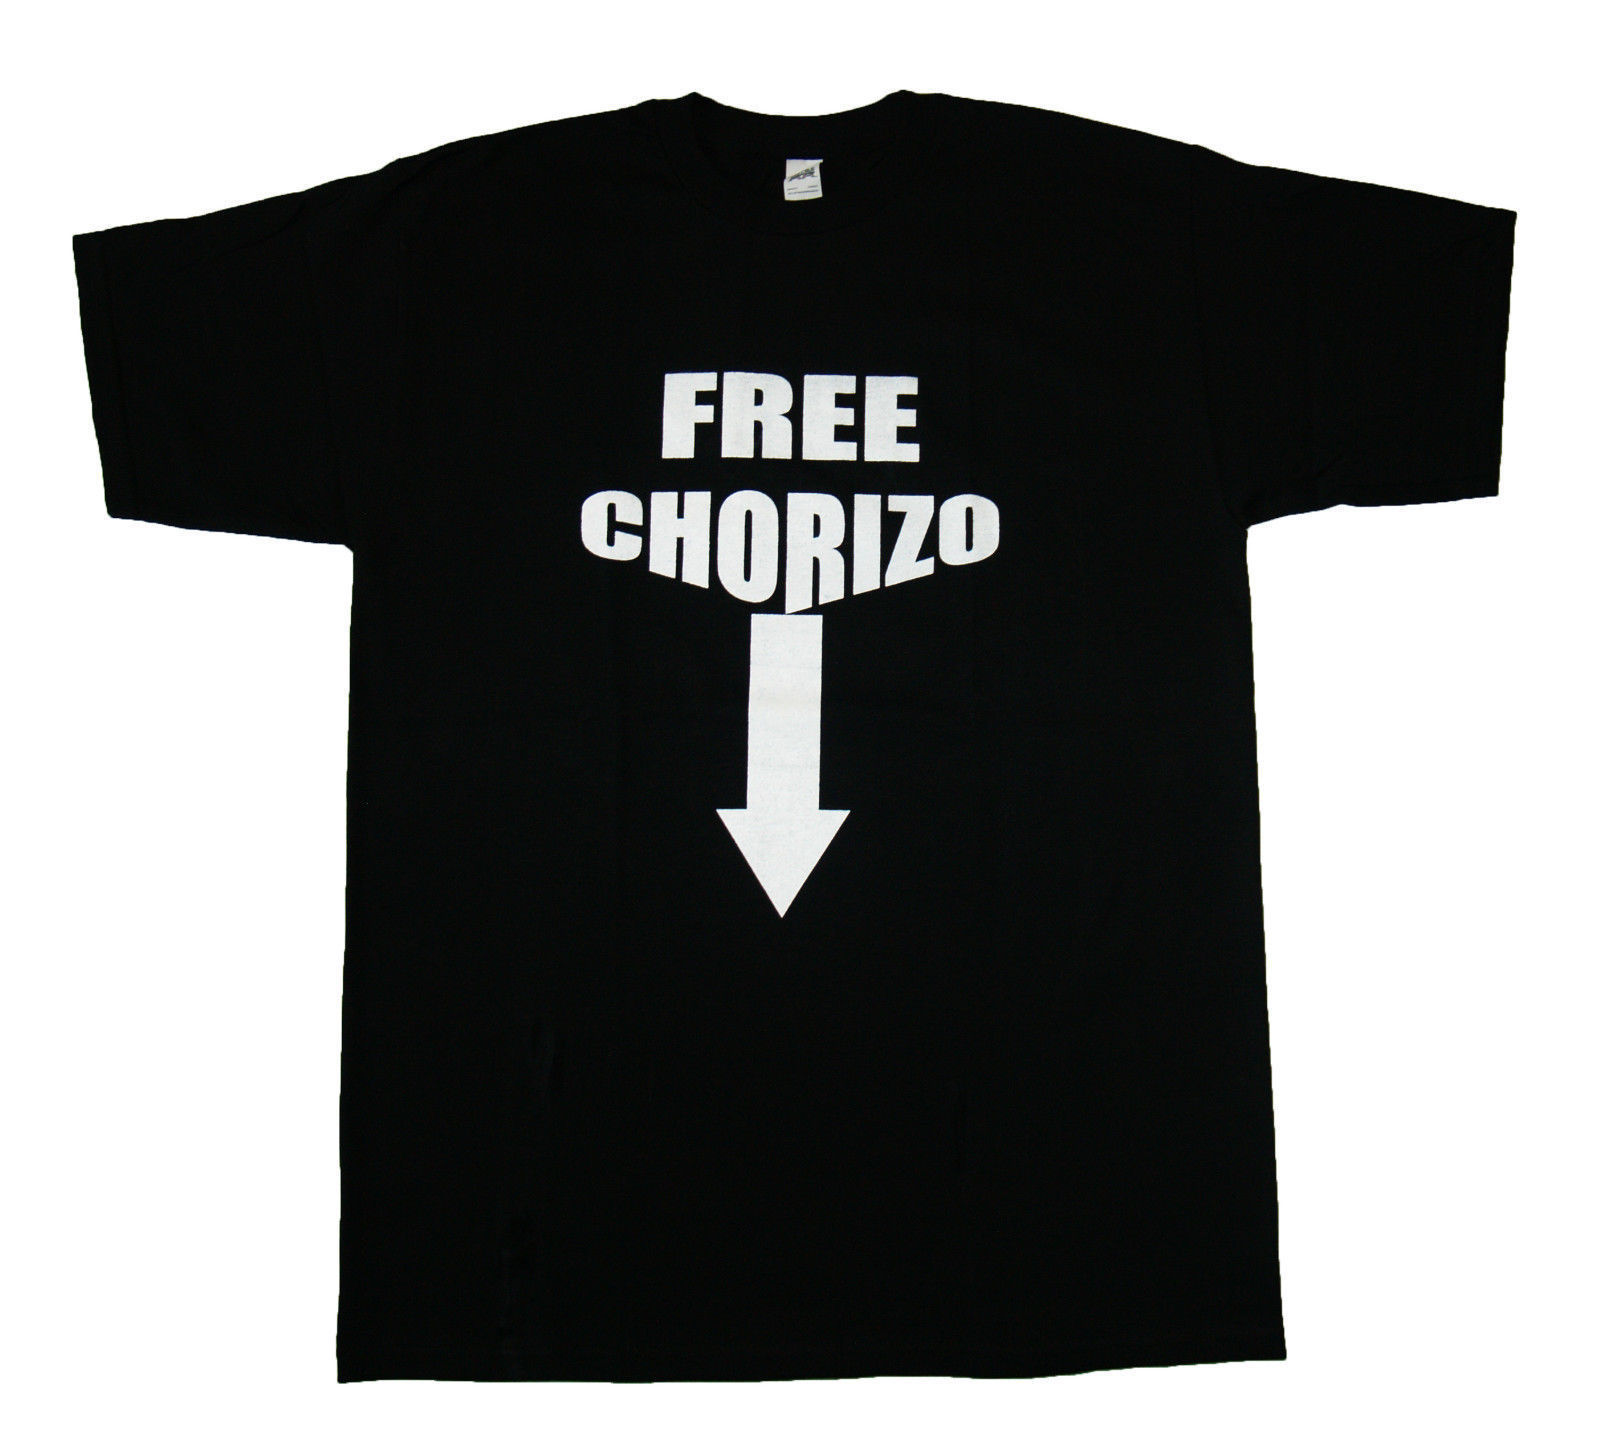 Primary image for FREE CHORIZO ~ Funny Mexican Tee Cotton Men's T-Shirt